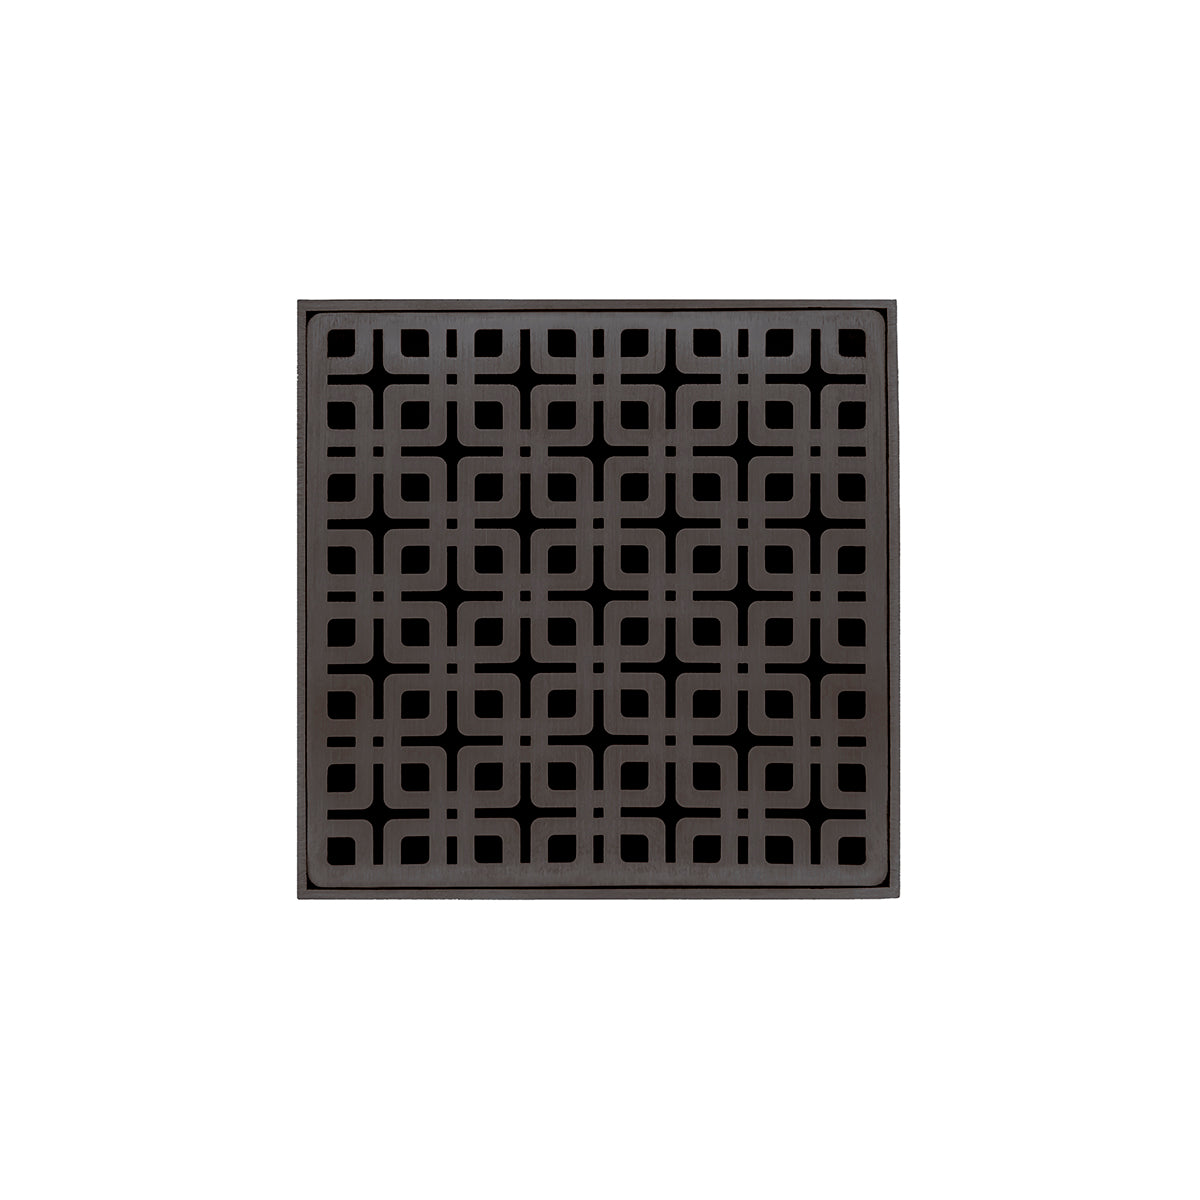 Infinity Drain 5" x 5" KD 5 Premium Center Drain Kit with Link Pattern Decorative Plate with PVC Drain Body, 2" Outlet